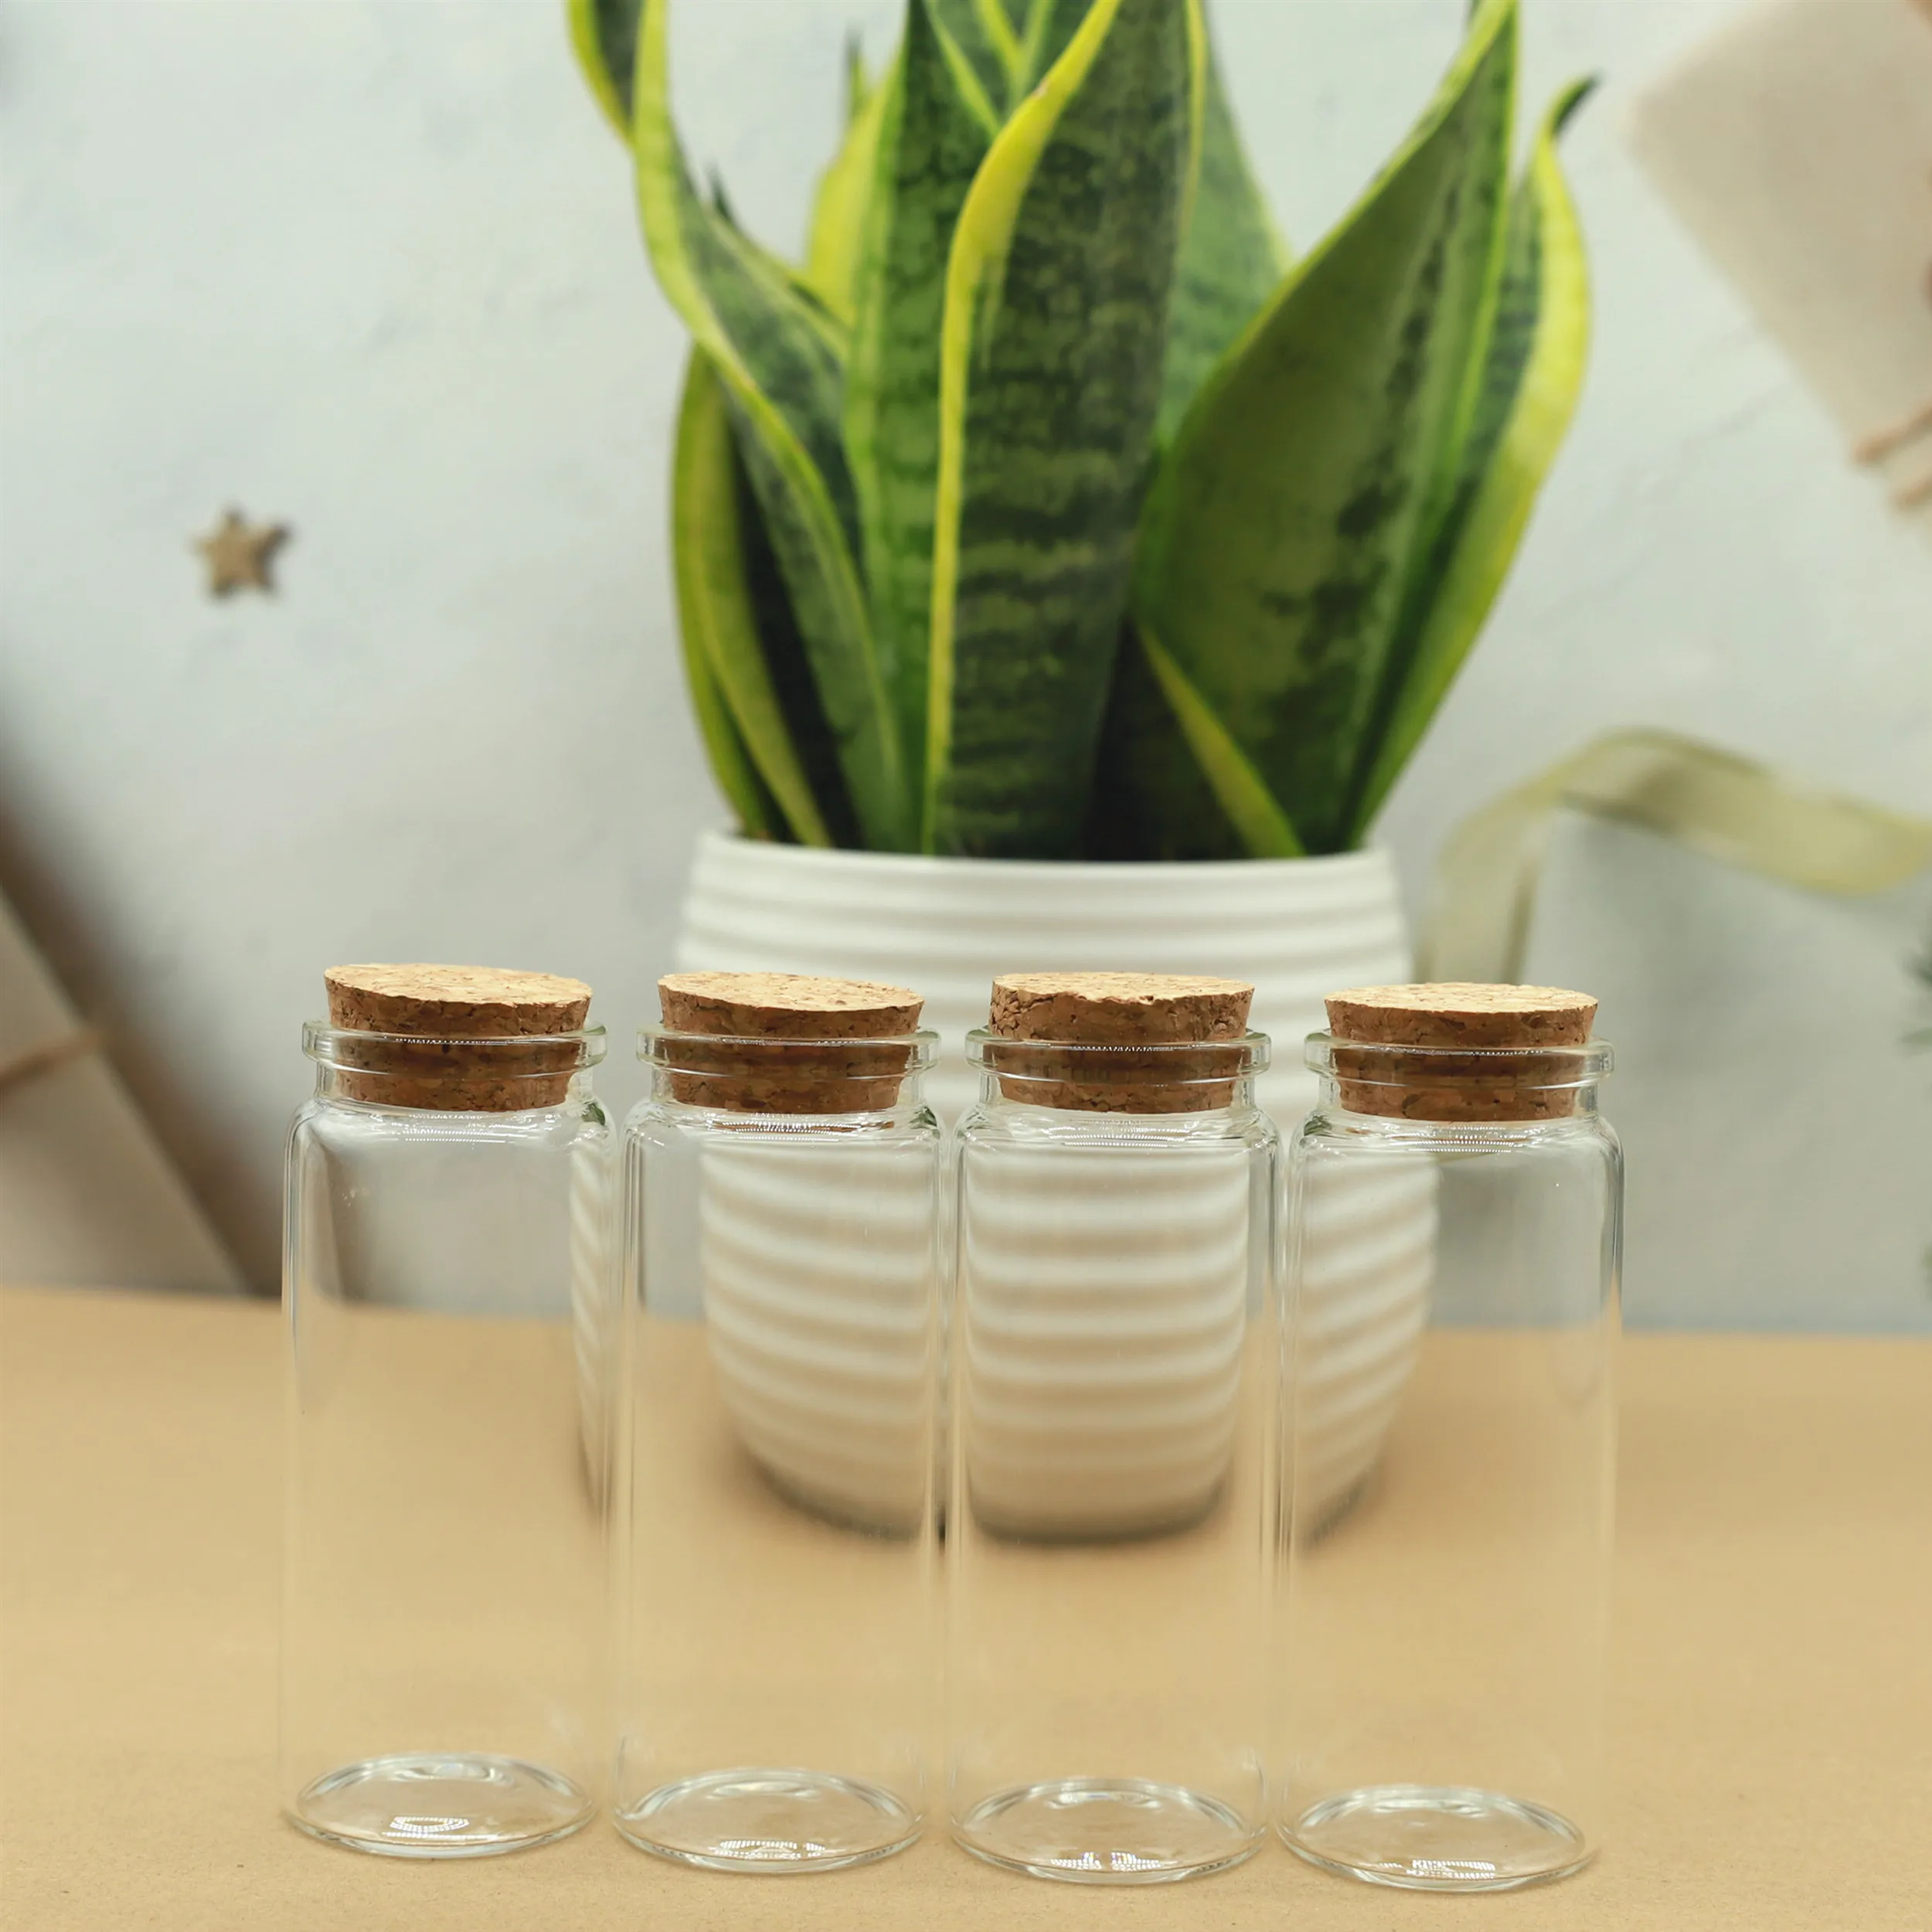 

24 Pieces Glass Bottles 37*90mm 70mlMini Storage tiny Jar for Spice Corks spicy Bottle Candy Containers Vials With Cork Stopper